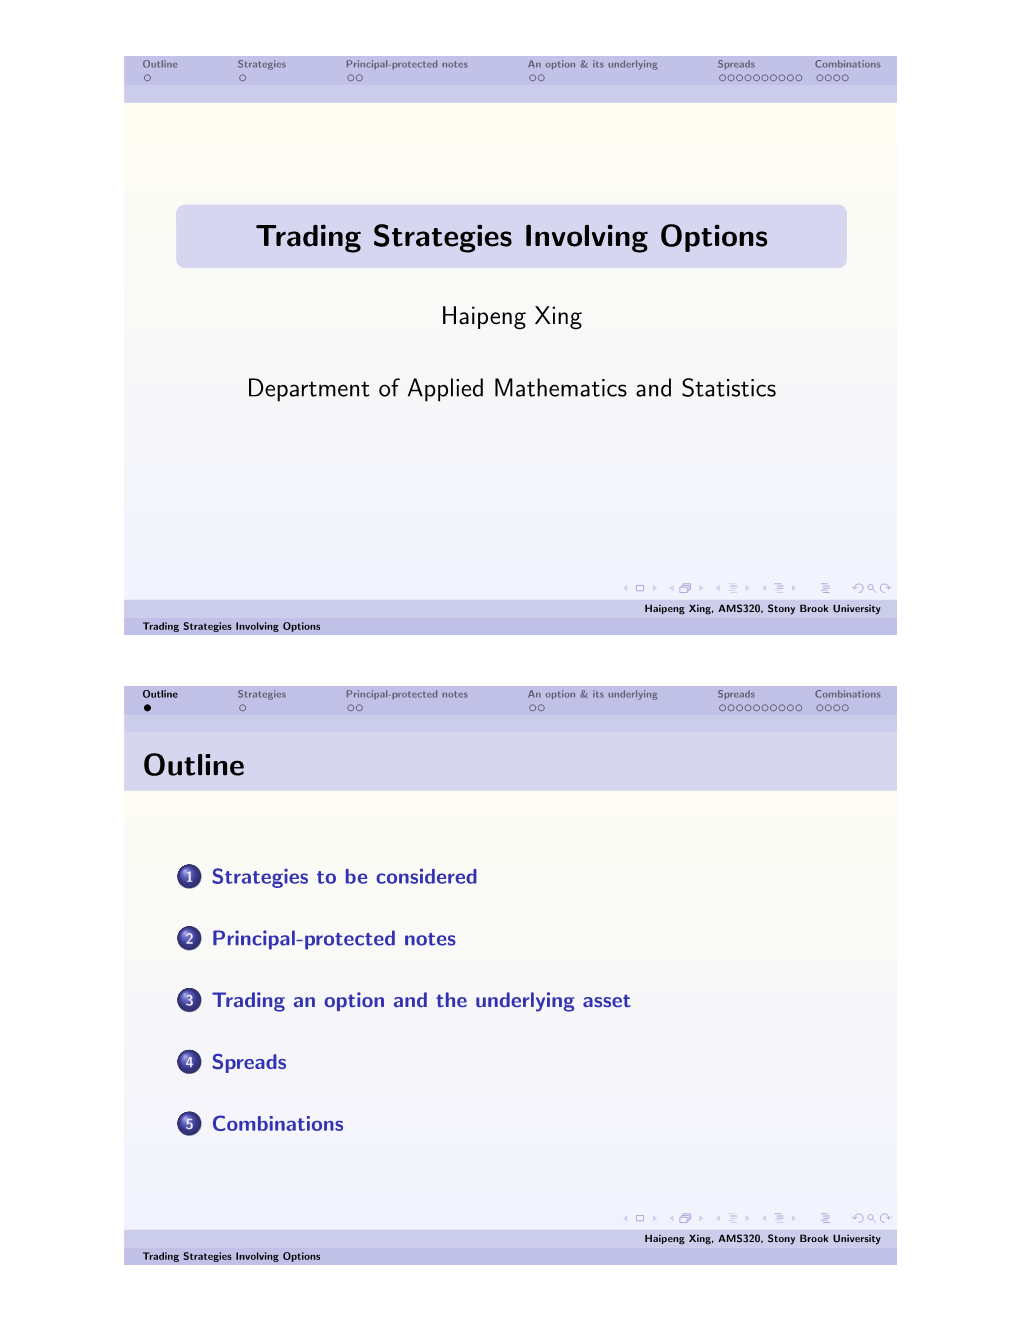 Trading Strategies Involving Options Outline Strategies Principal-Protected Notes an Option & Its Underlying Spreads Combinations